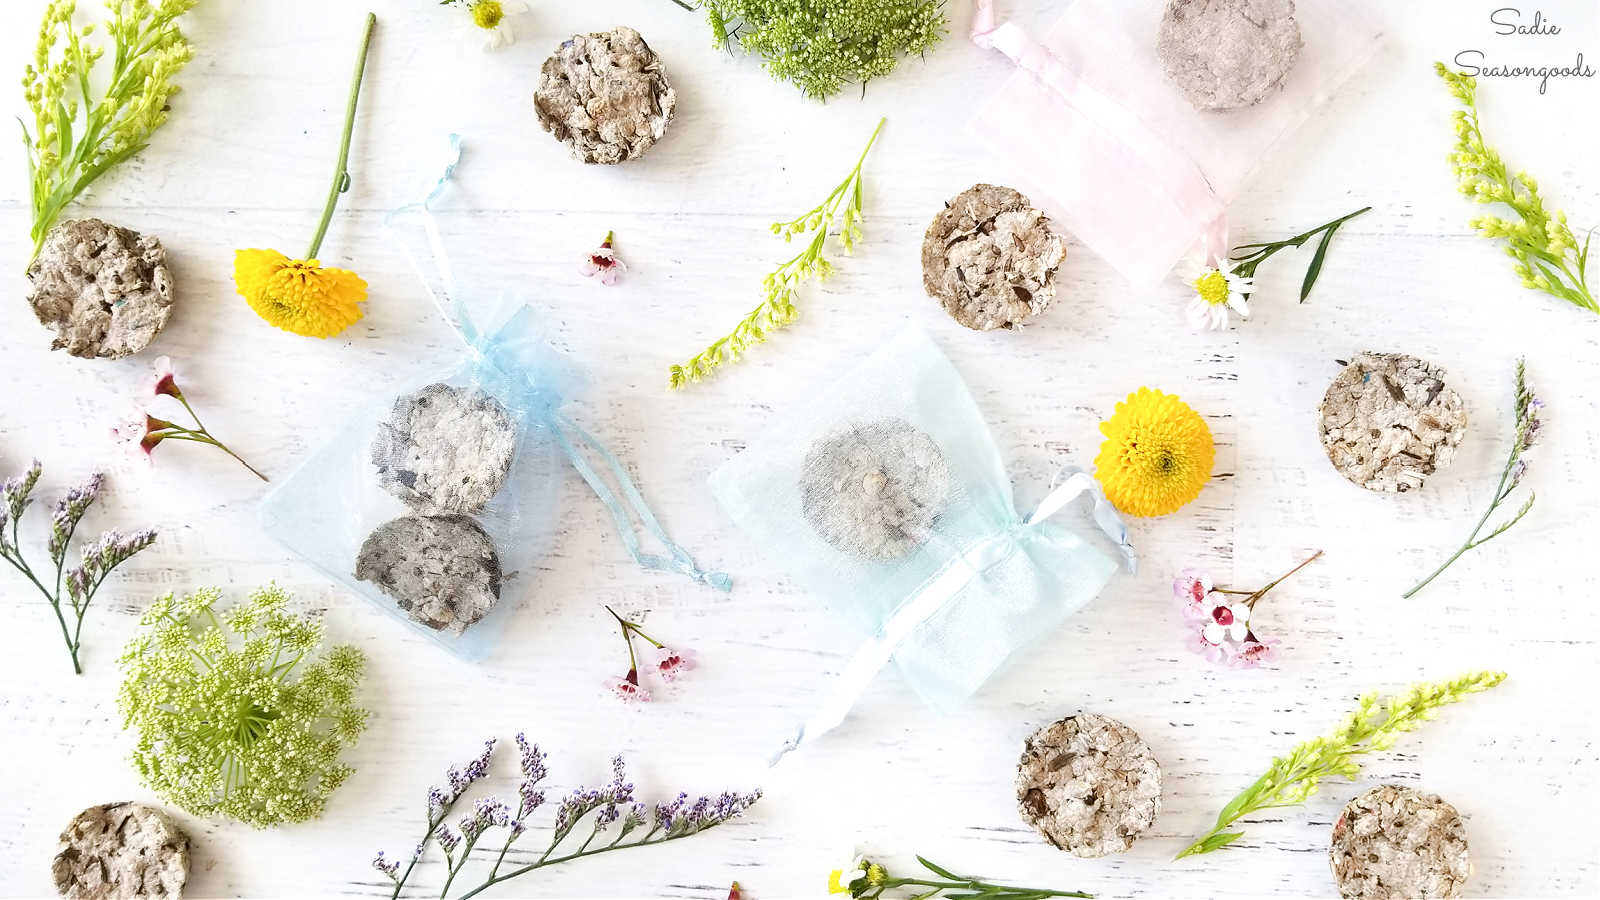 diy wildflower seed bombs from recycled paper